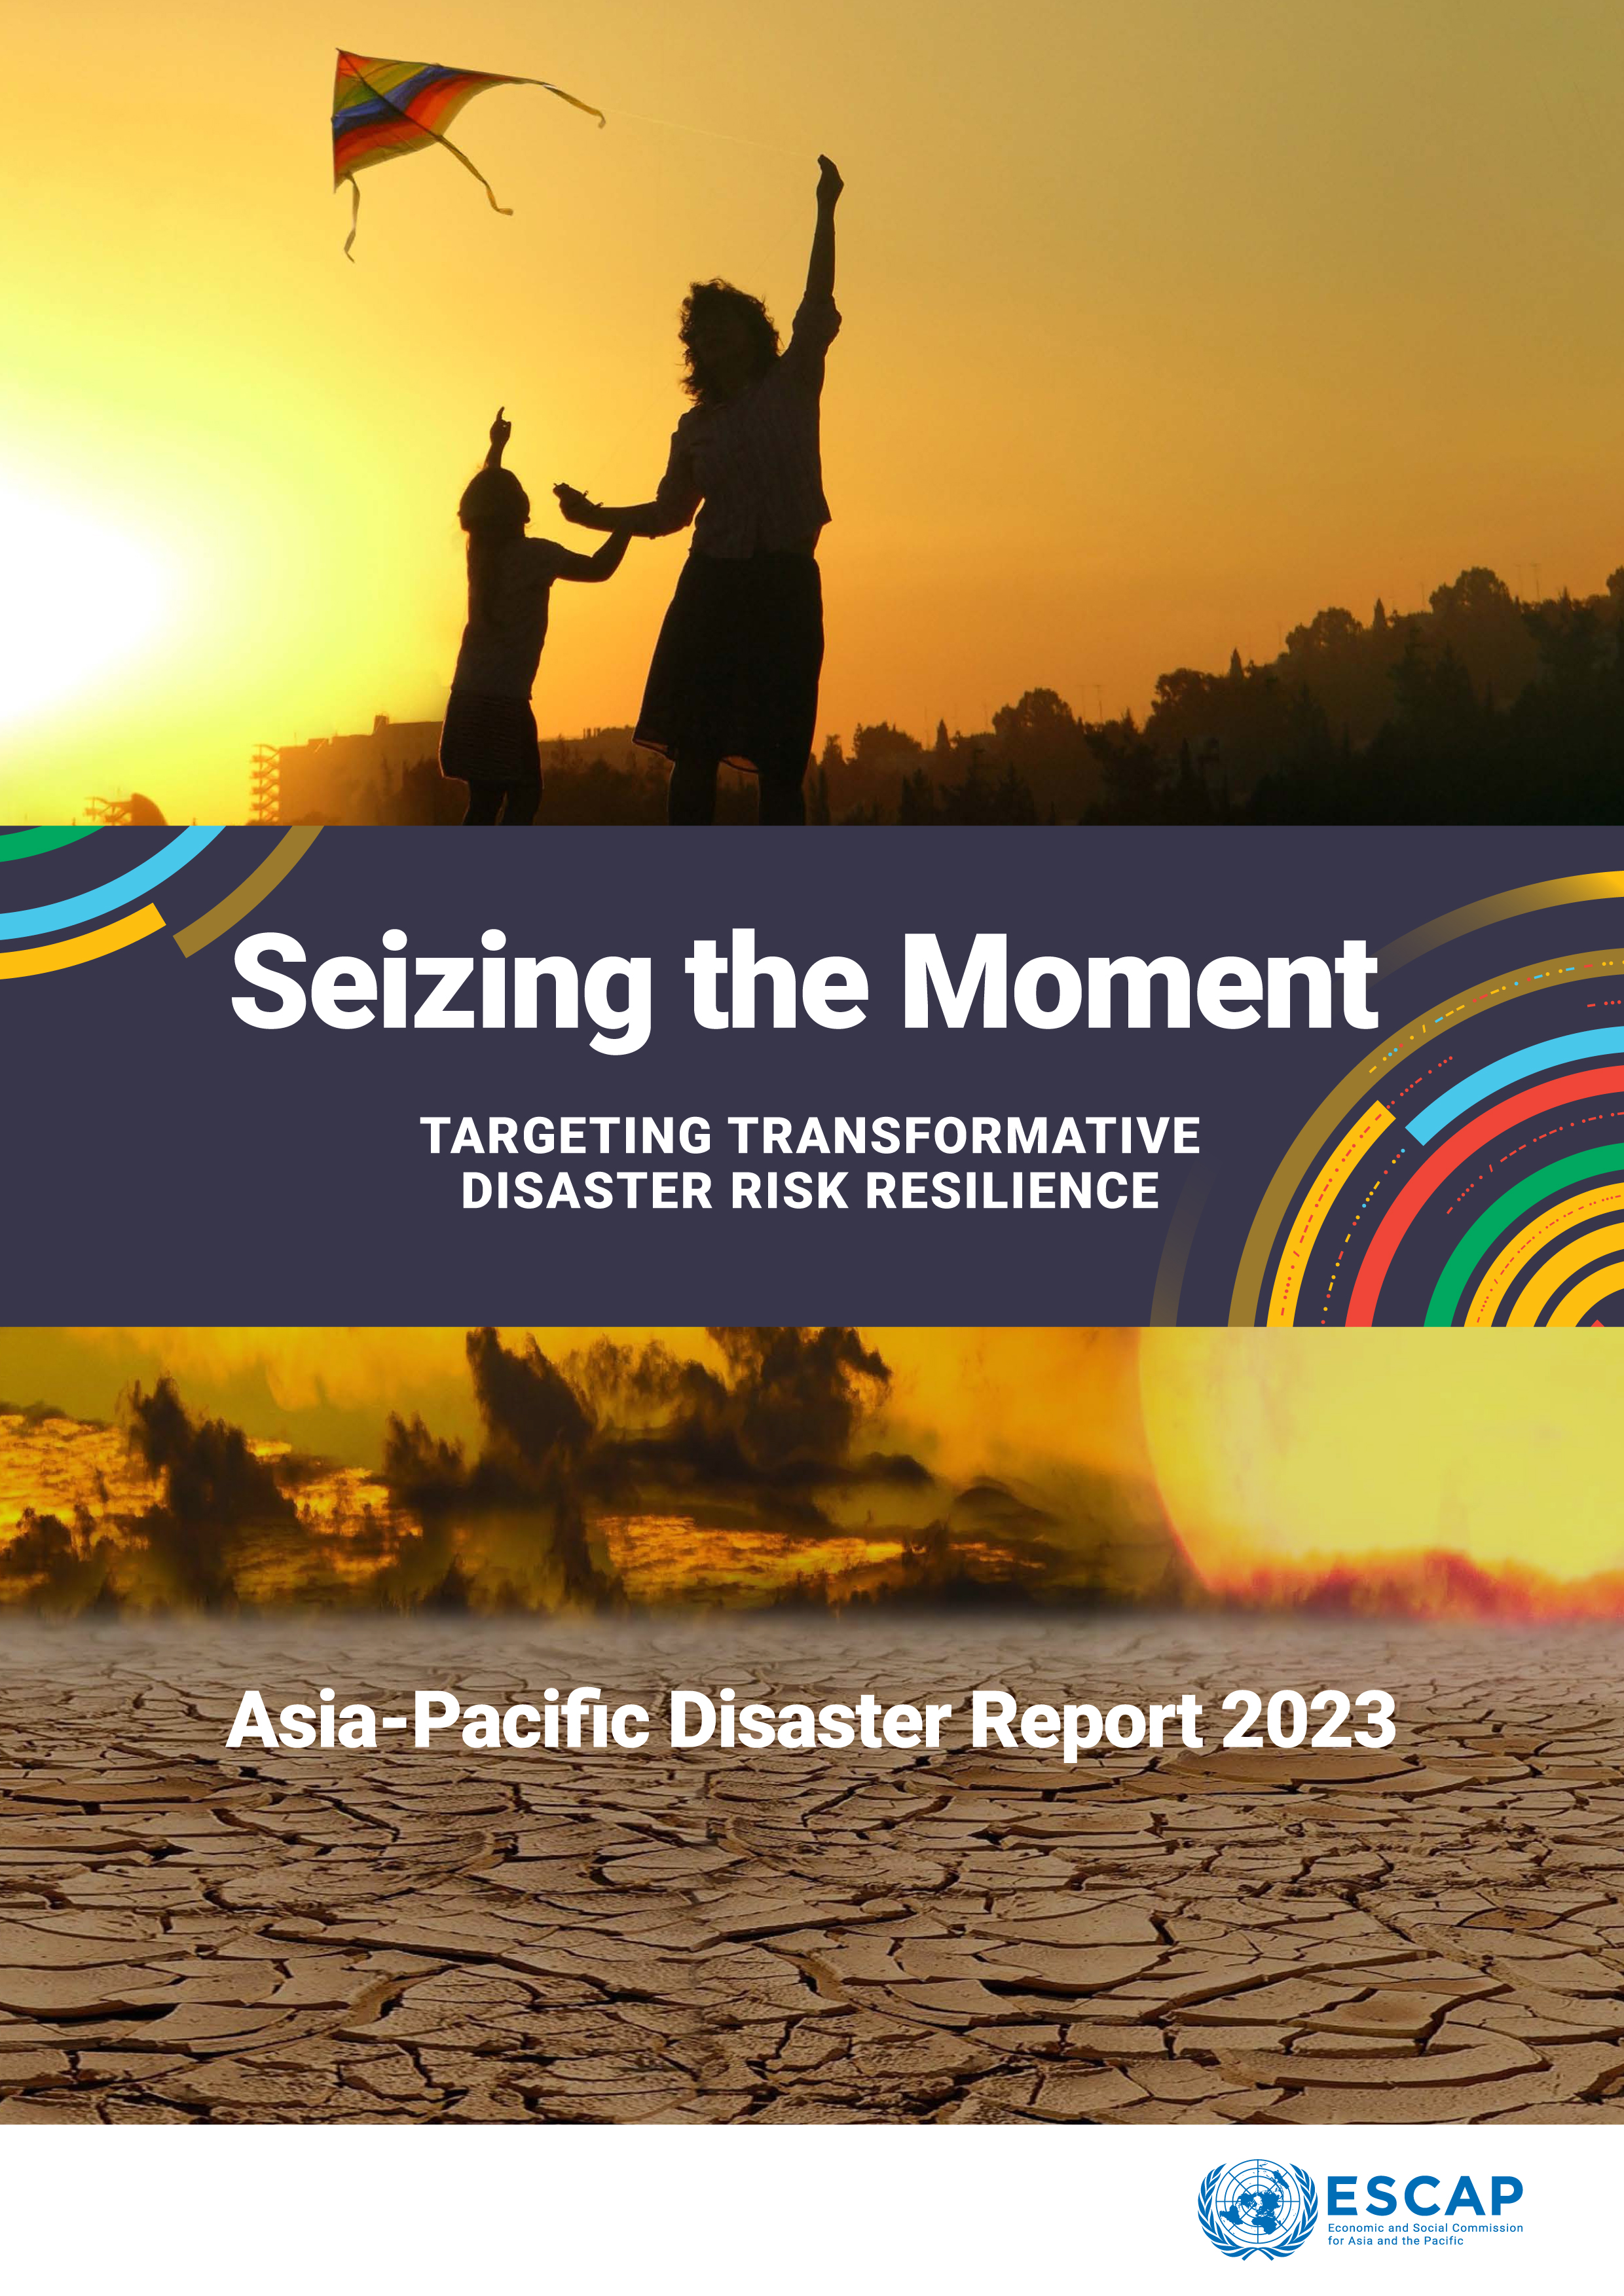 image of Asia-Pacific Disaster Report 2023